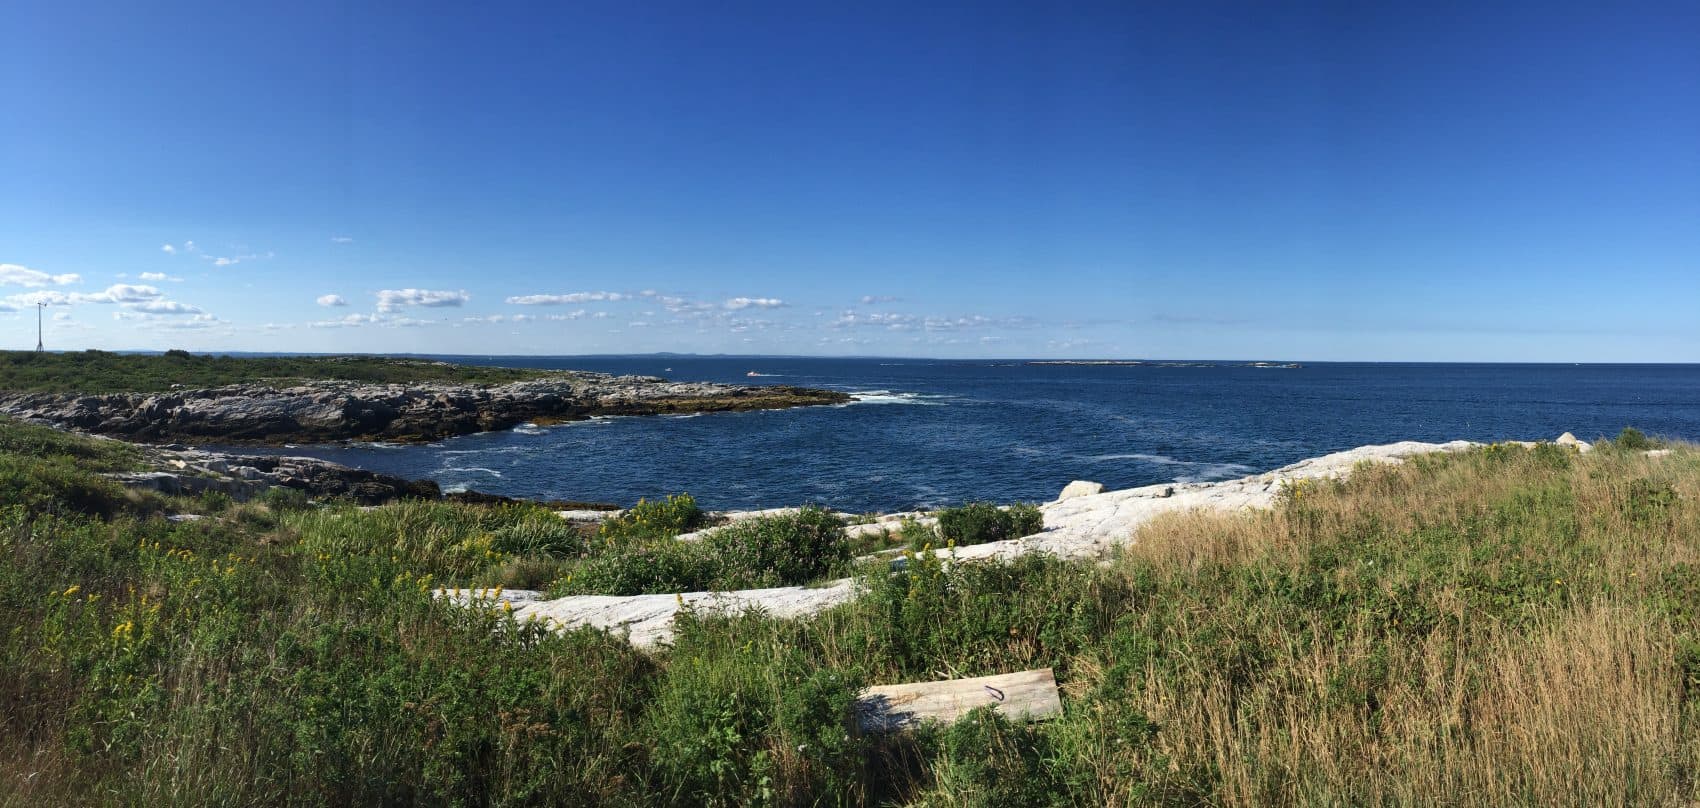 The coast of Appledore Island, the largest of the Isles of Shoals off the coast of Maine. (Courtesy Amy Sherwood)